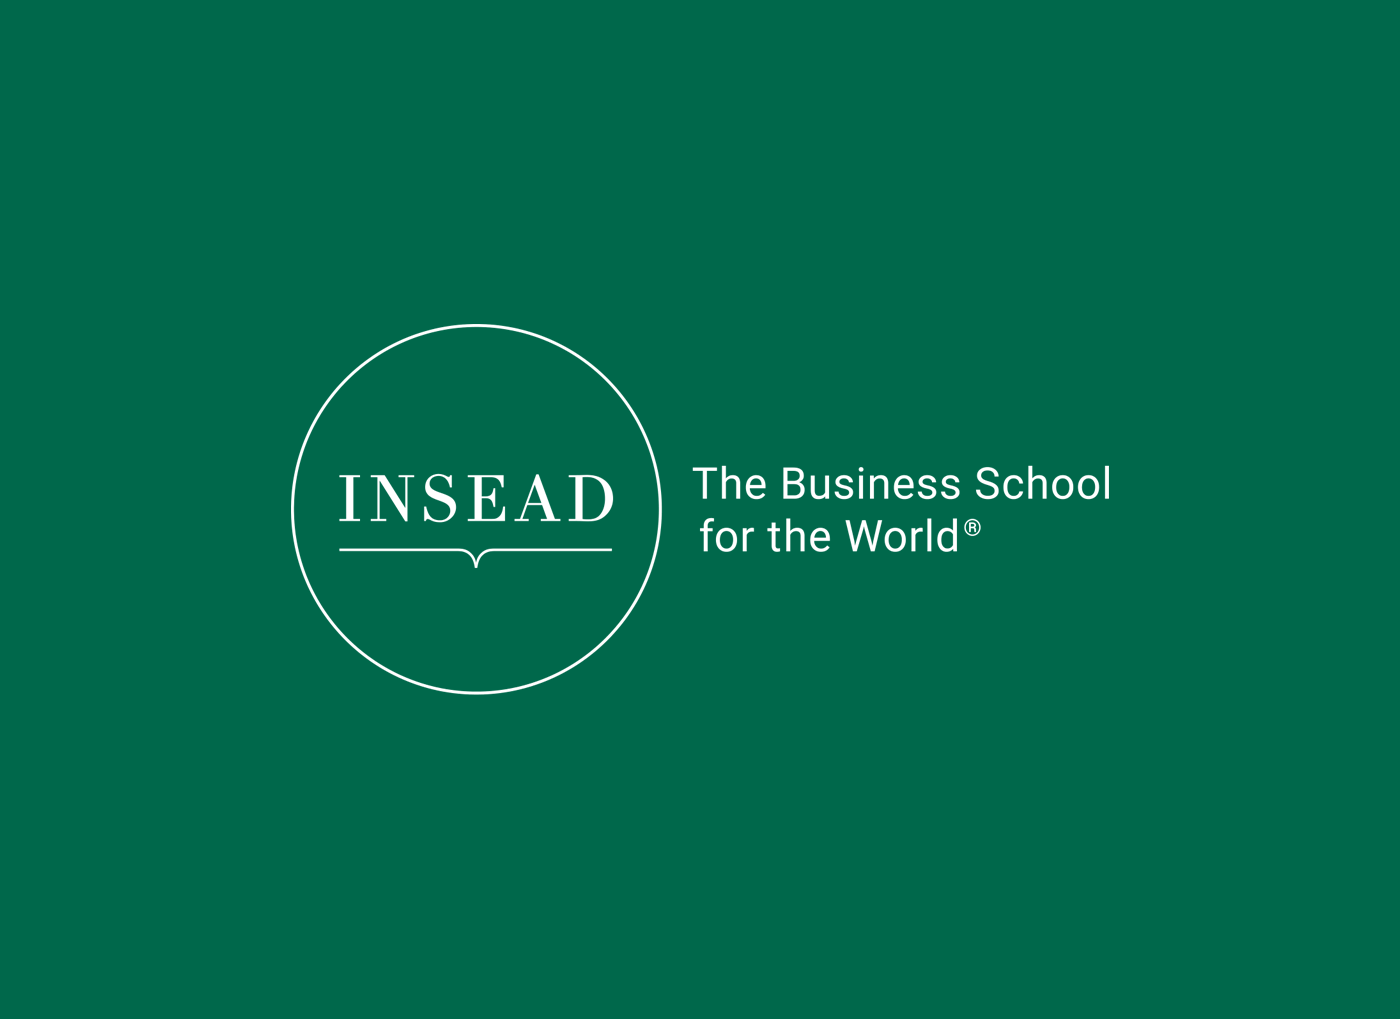 insead the business school for the world logo